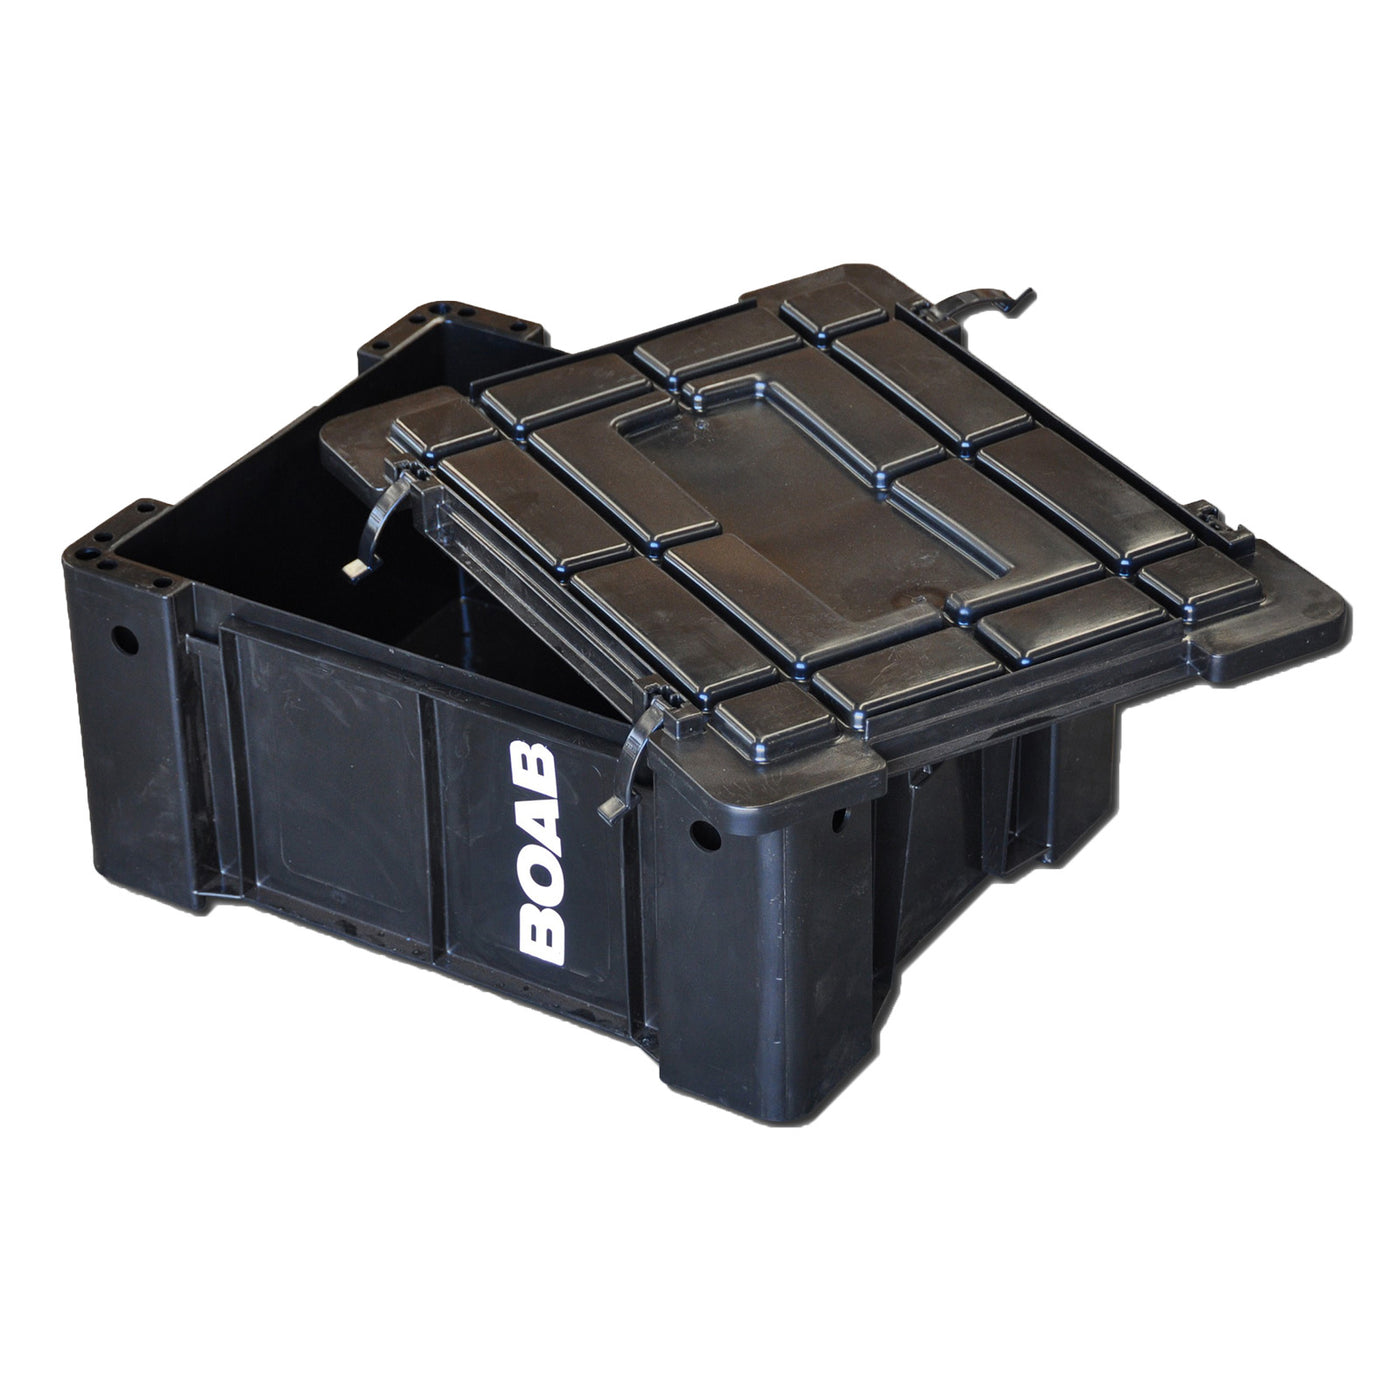 WOLFPACK STORAGE BOX, CLIP-ON LID